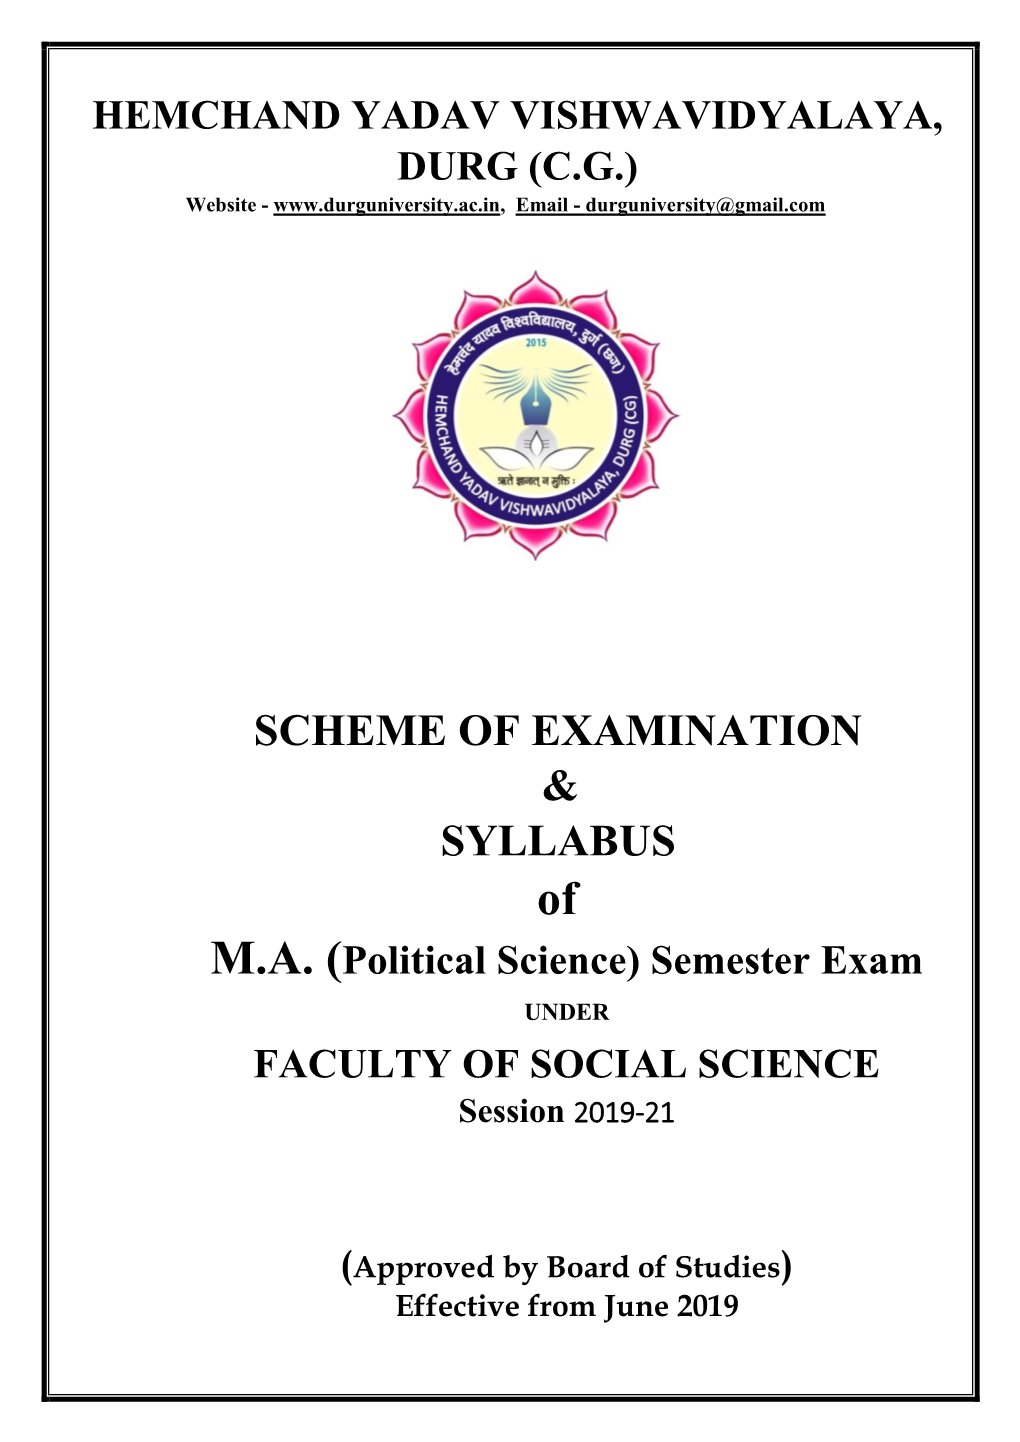 M.A. Political Science (Semester Examination Session 2019-21)